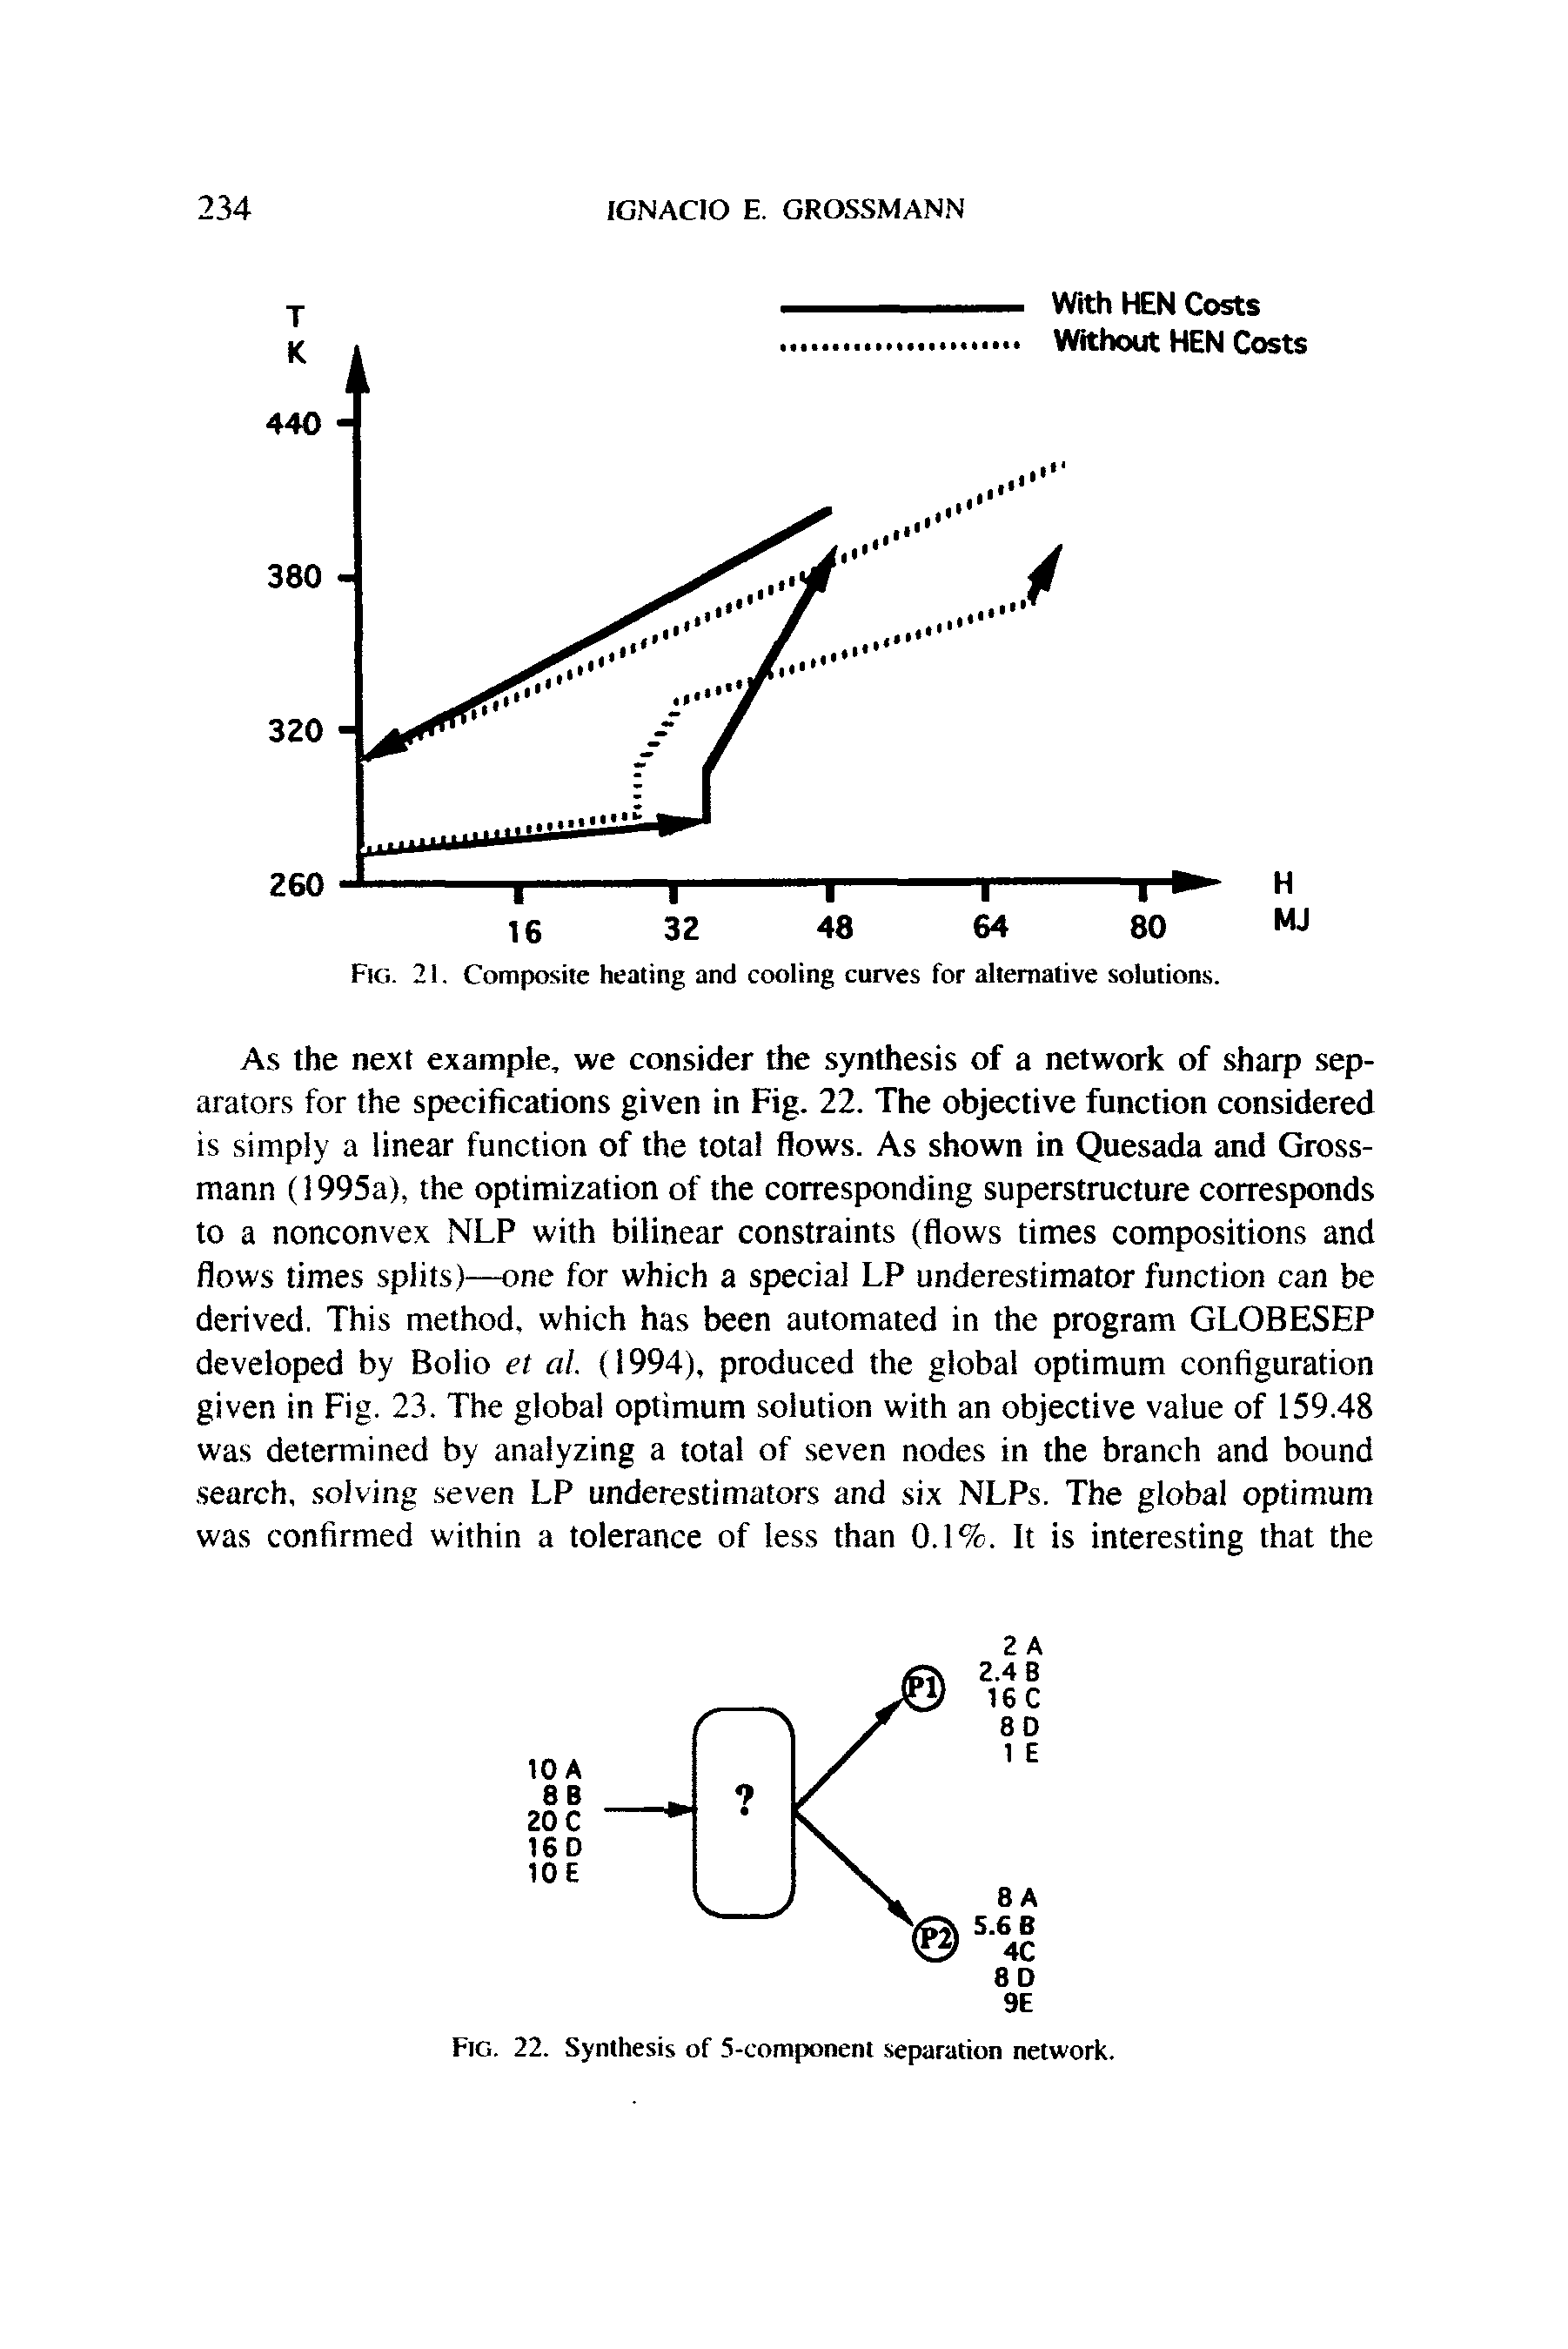 Fig. 21. Composite heating and cooling curves for alternative solutions.